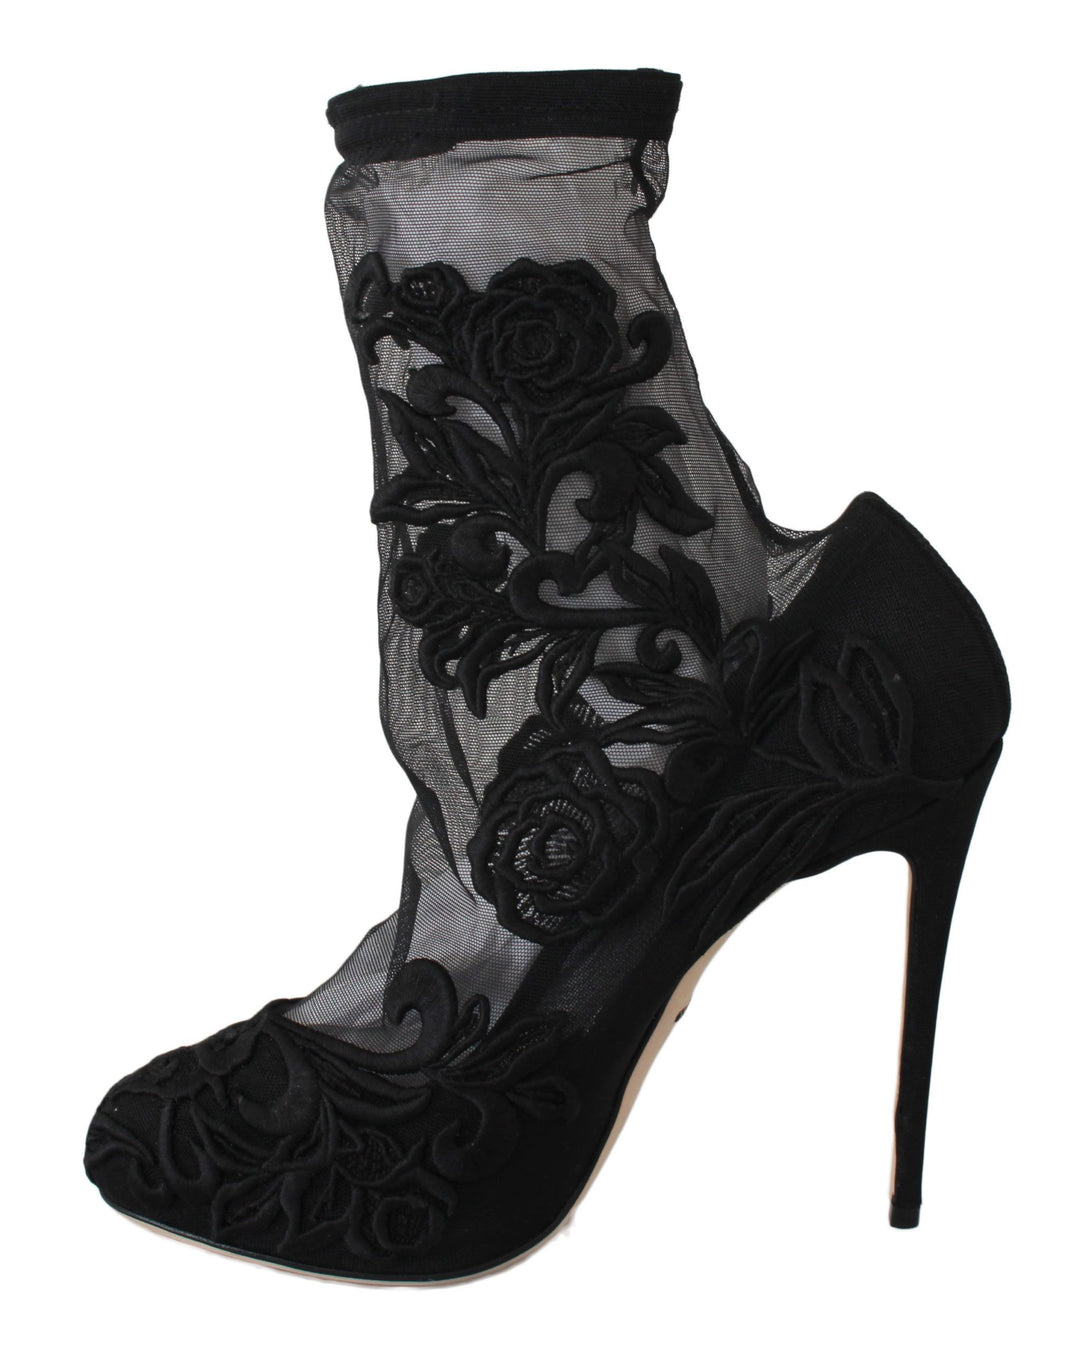 Dolce & Gabbana Embroidered Floral Stiletto Socks Booties